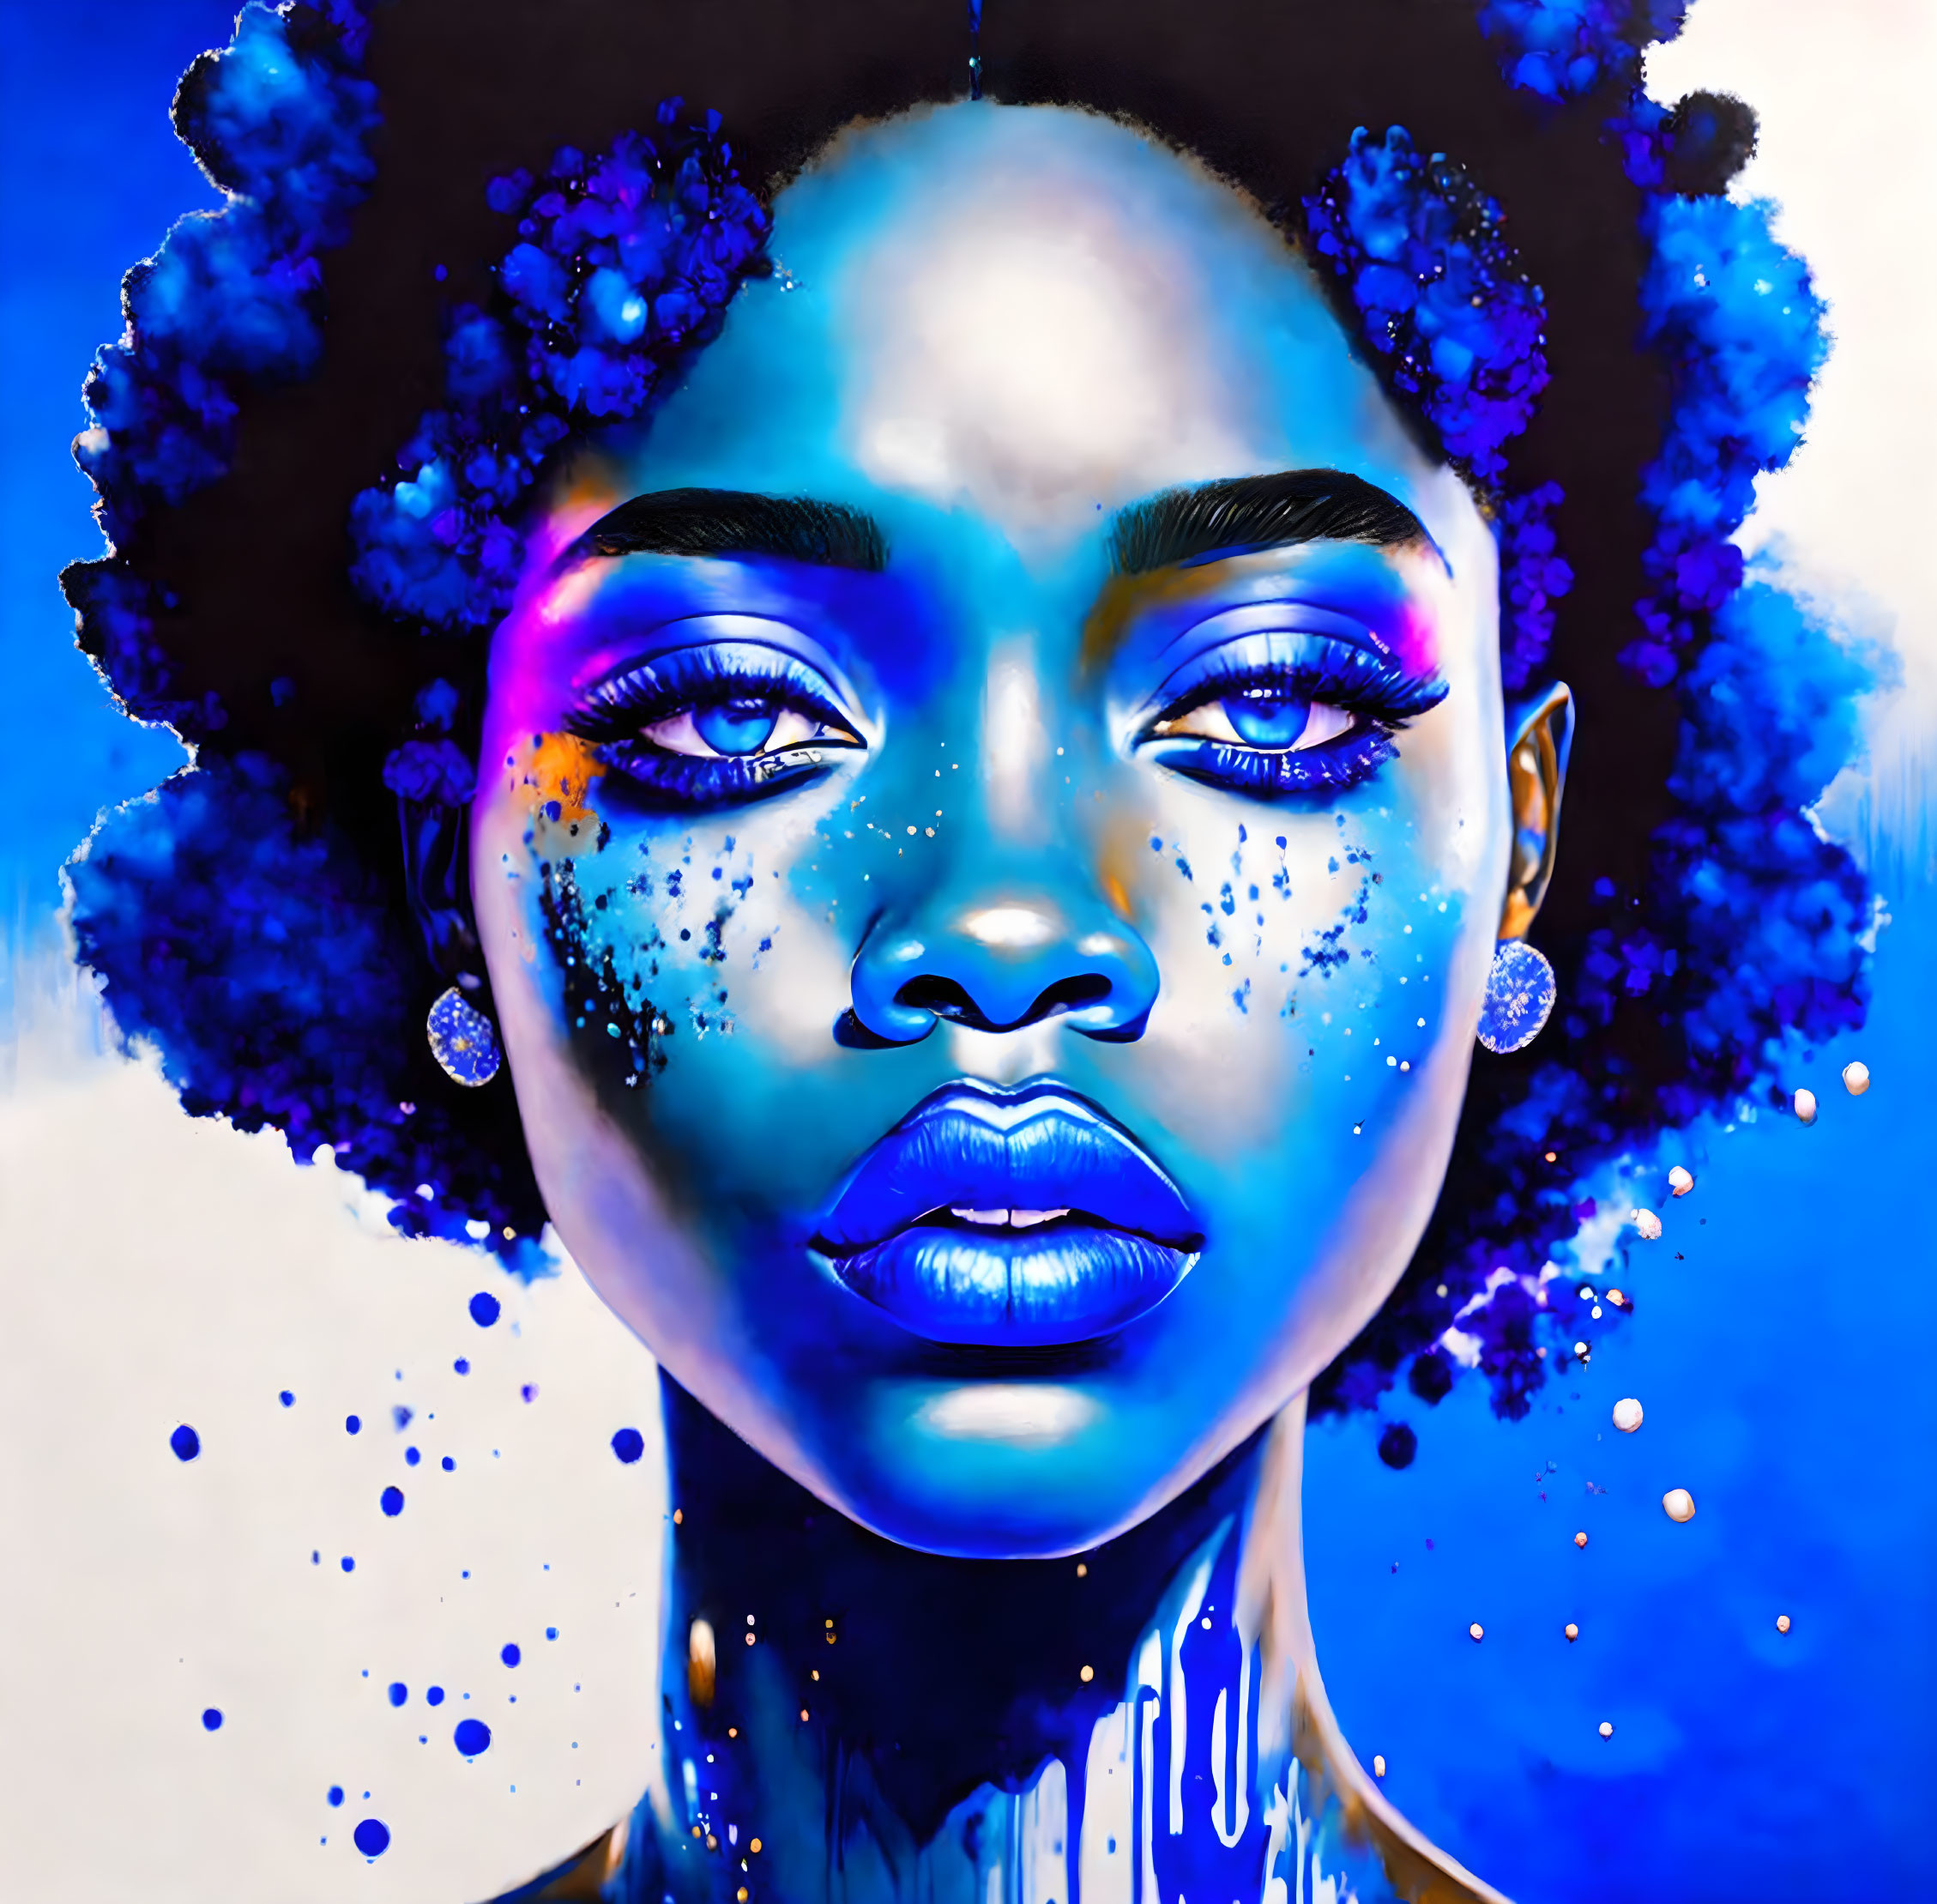 Vivid painting of woman with blue skin, Afro hair, and flowers on blue & white background